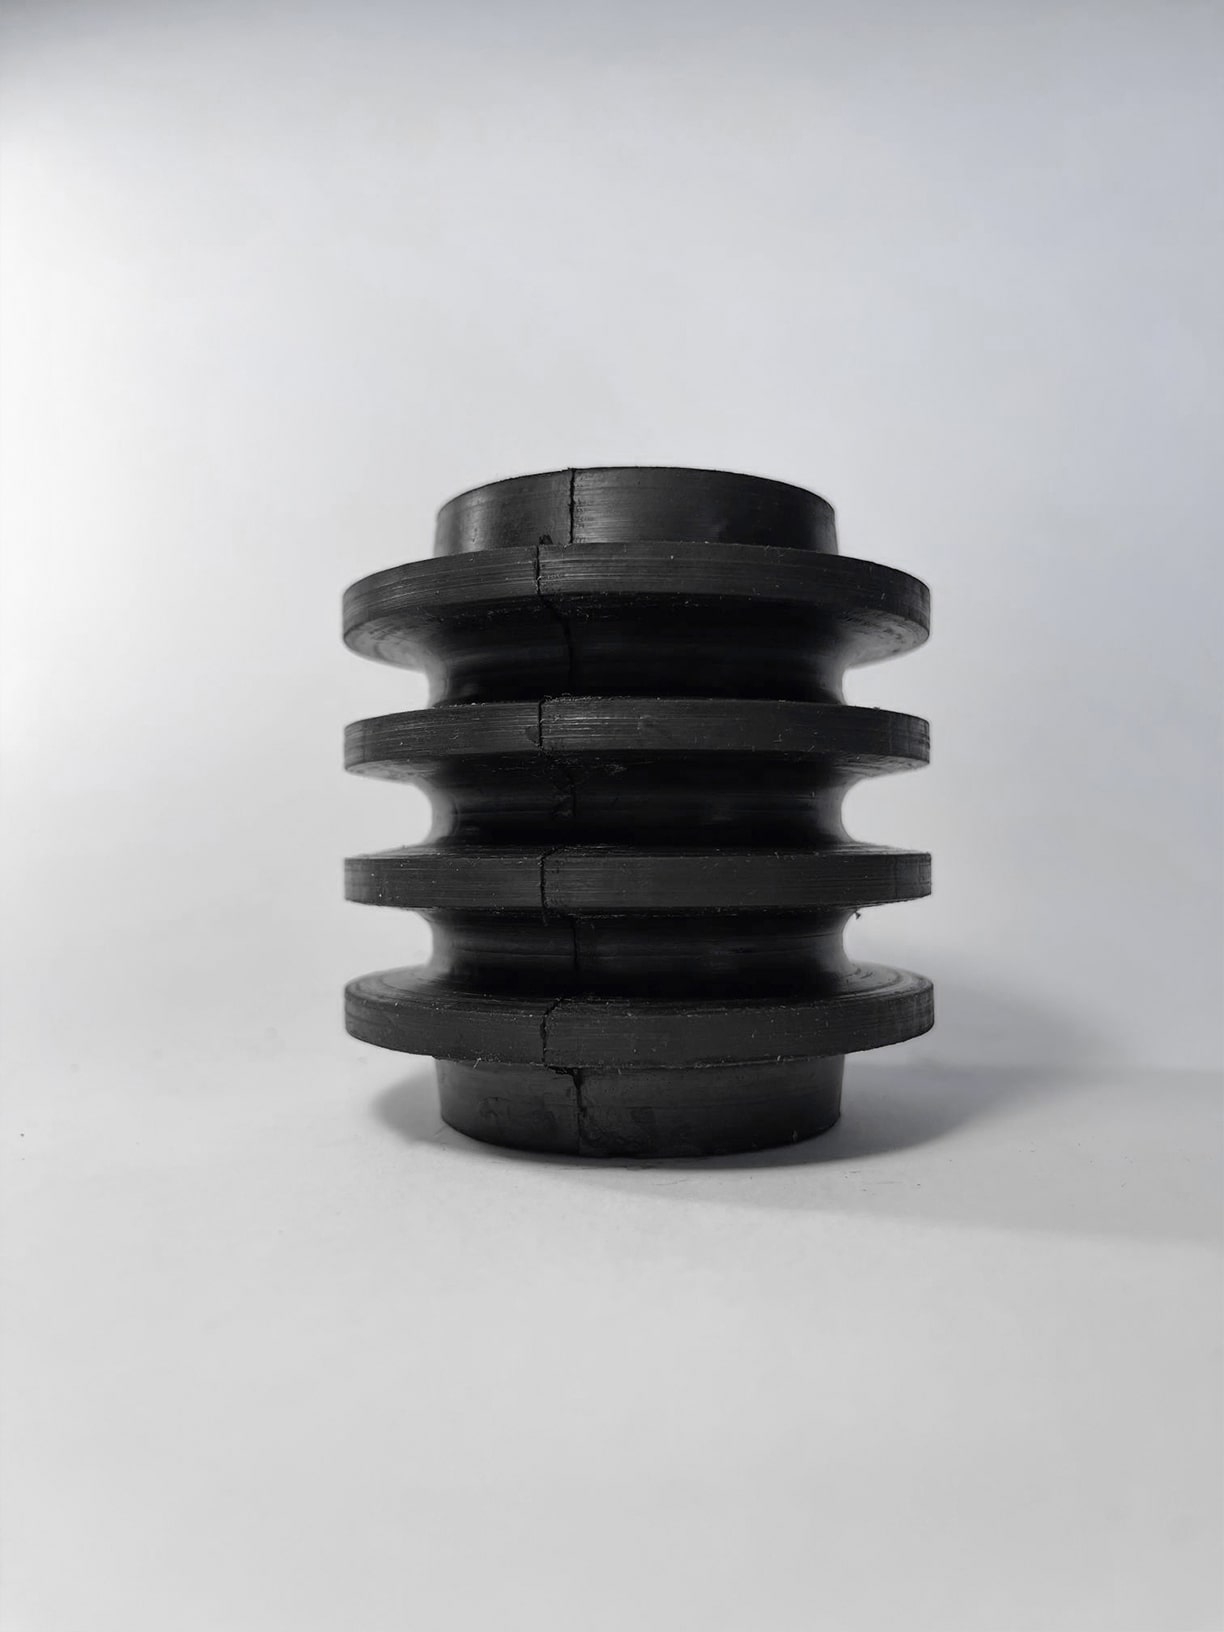 Auto Tech Products - Industrial Rubber - Tehnoguma - Technical Products 7